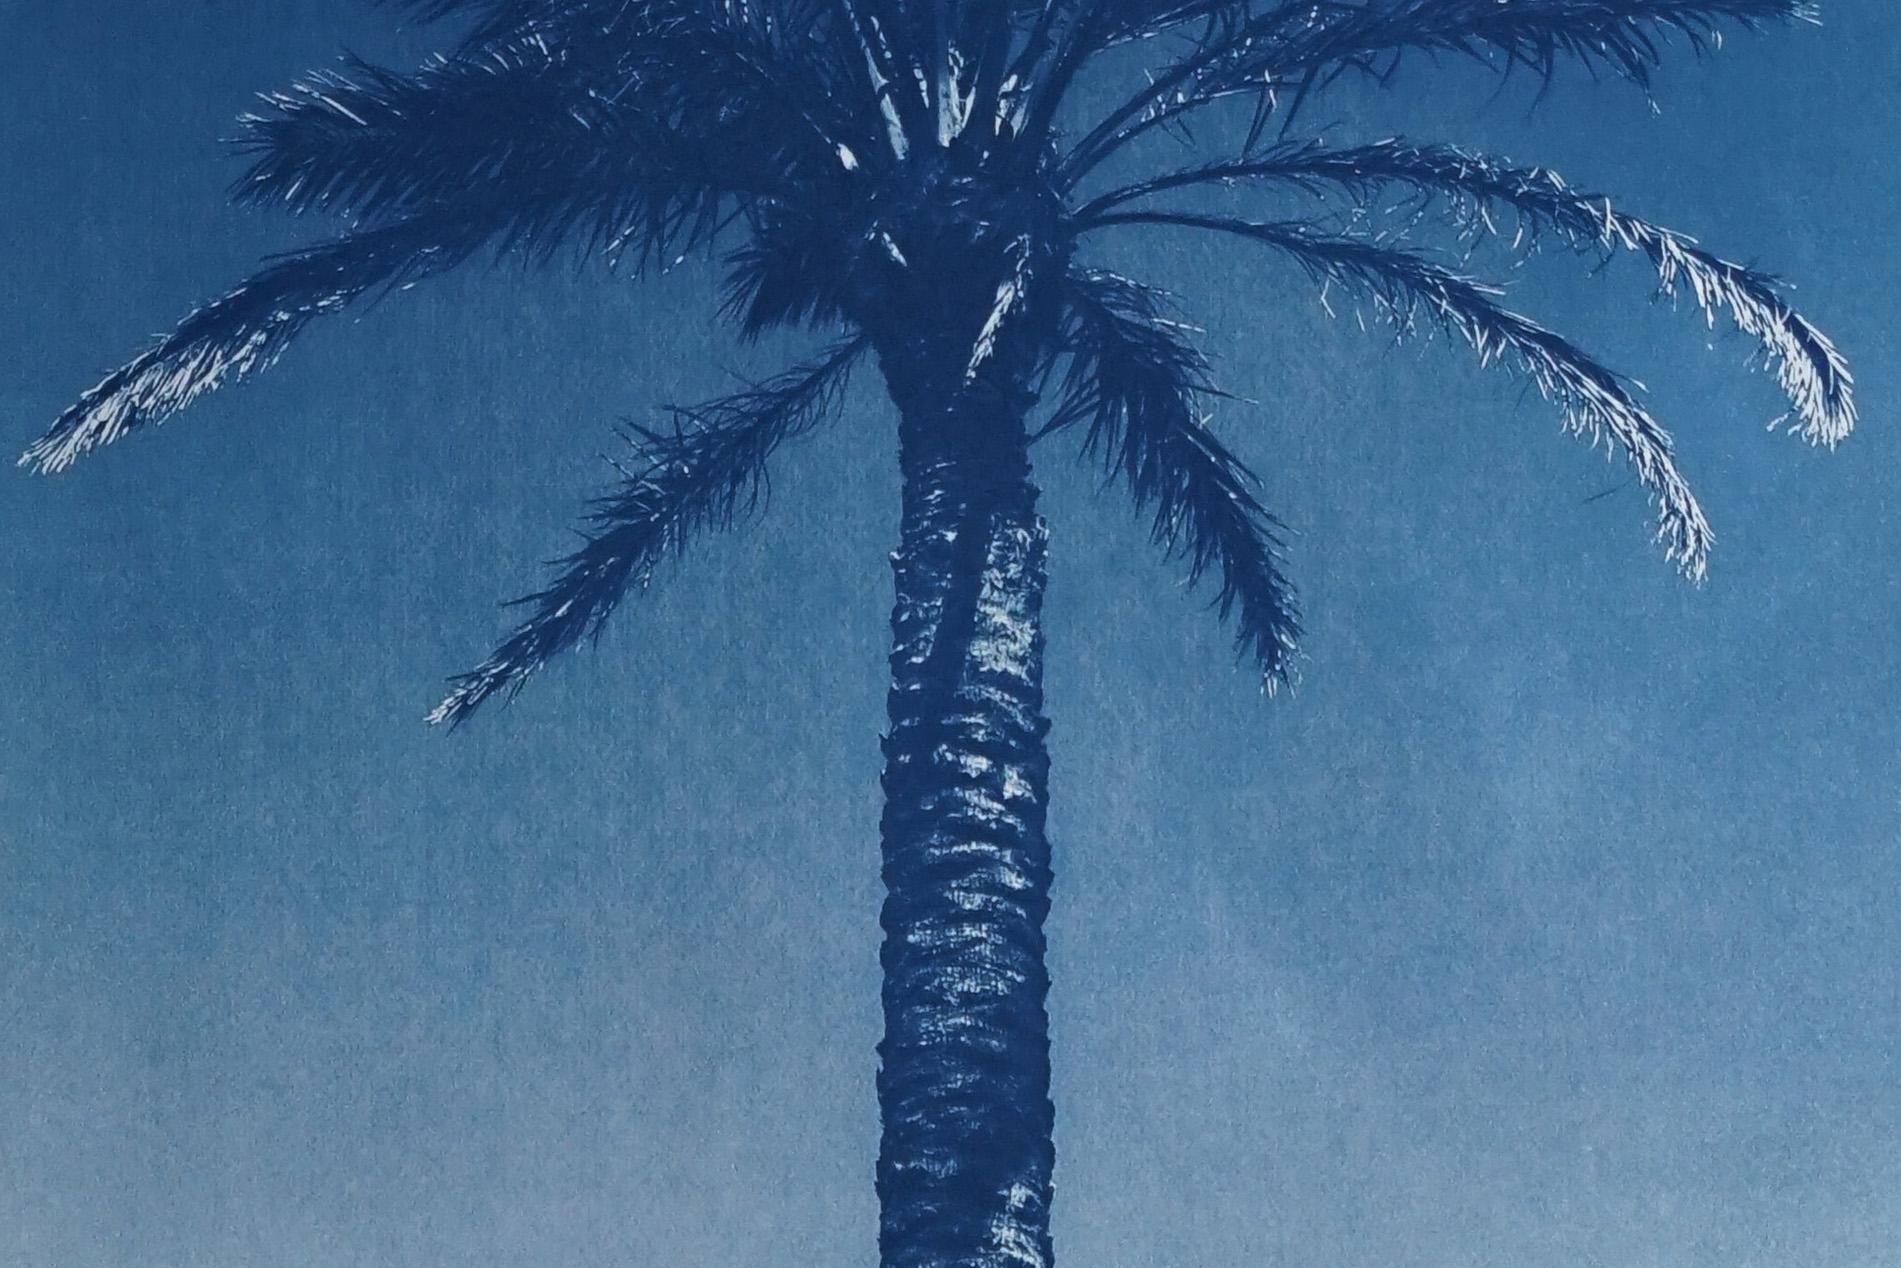 Nile River Palm, Botanical Cyanotype, Watercolor Paper, Blue Tropical Palm 2022 - Realist Art by Kind of Cyan